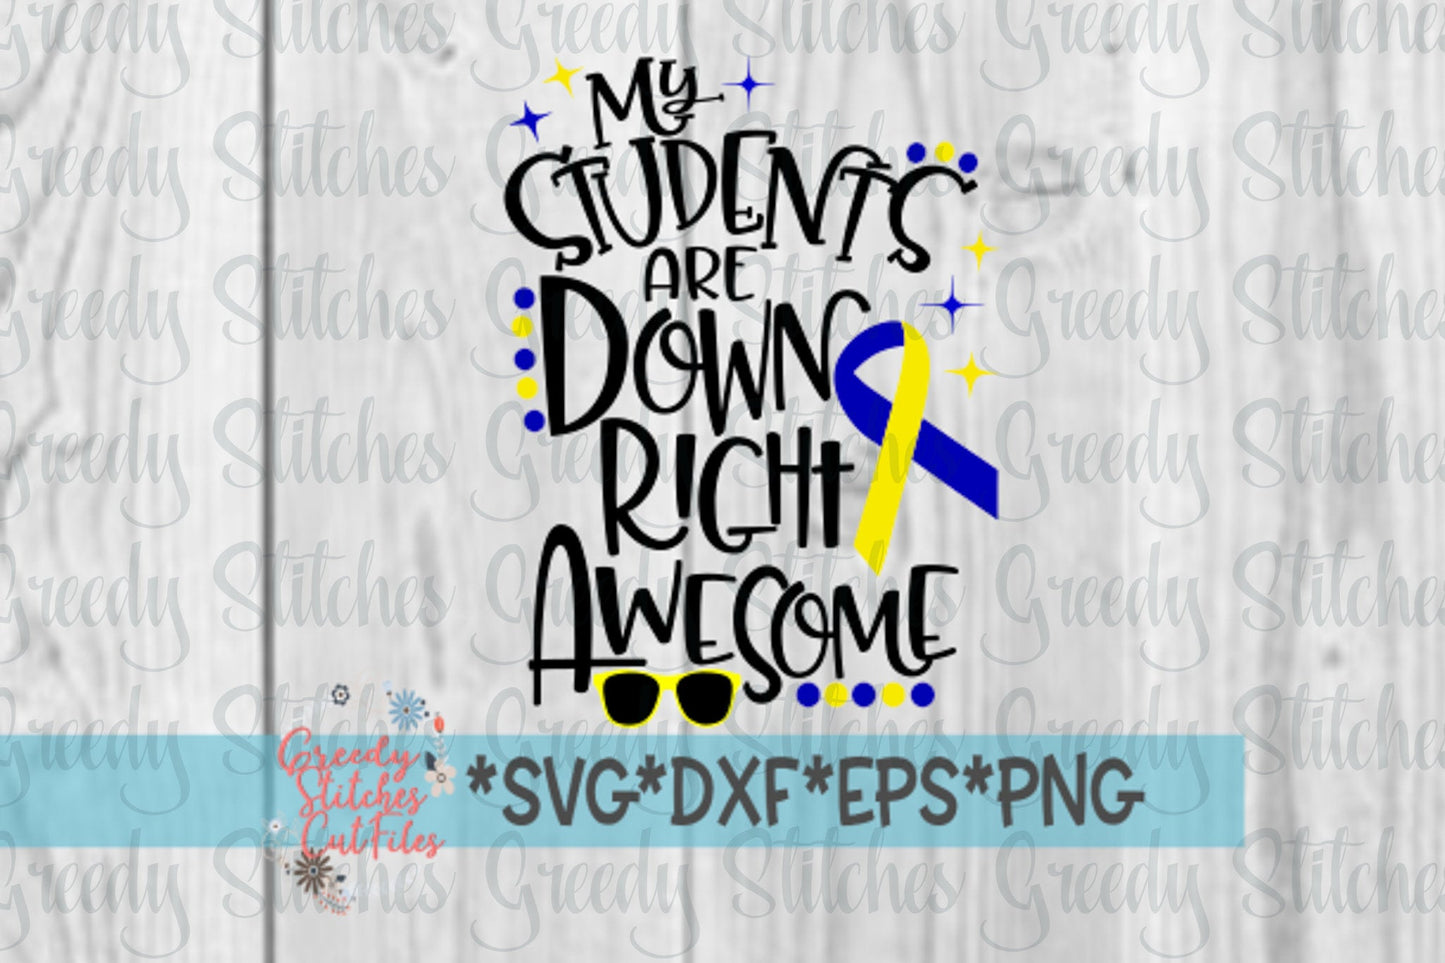 Down Syndrome Awareness SvG | My Students Are Down Right Awesome svg dxf eps png. SPED SvG | Back To School SVG | Teacher SvG | Cut File